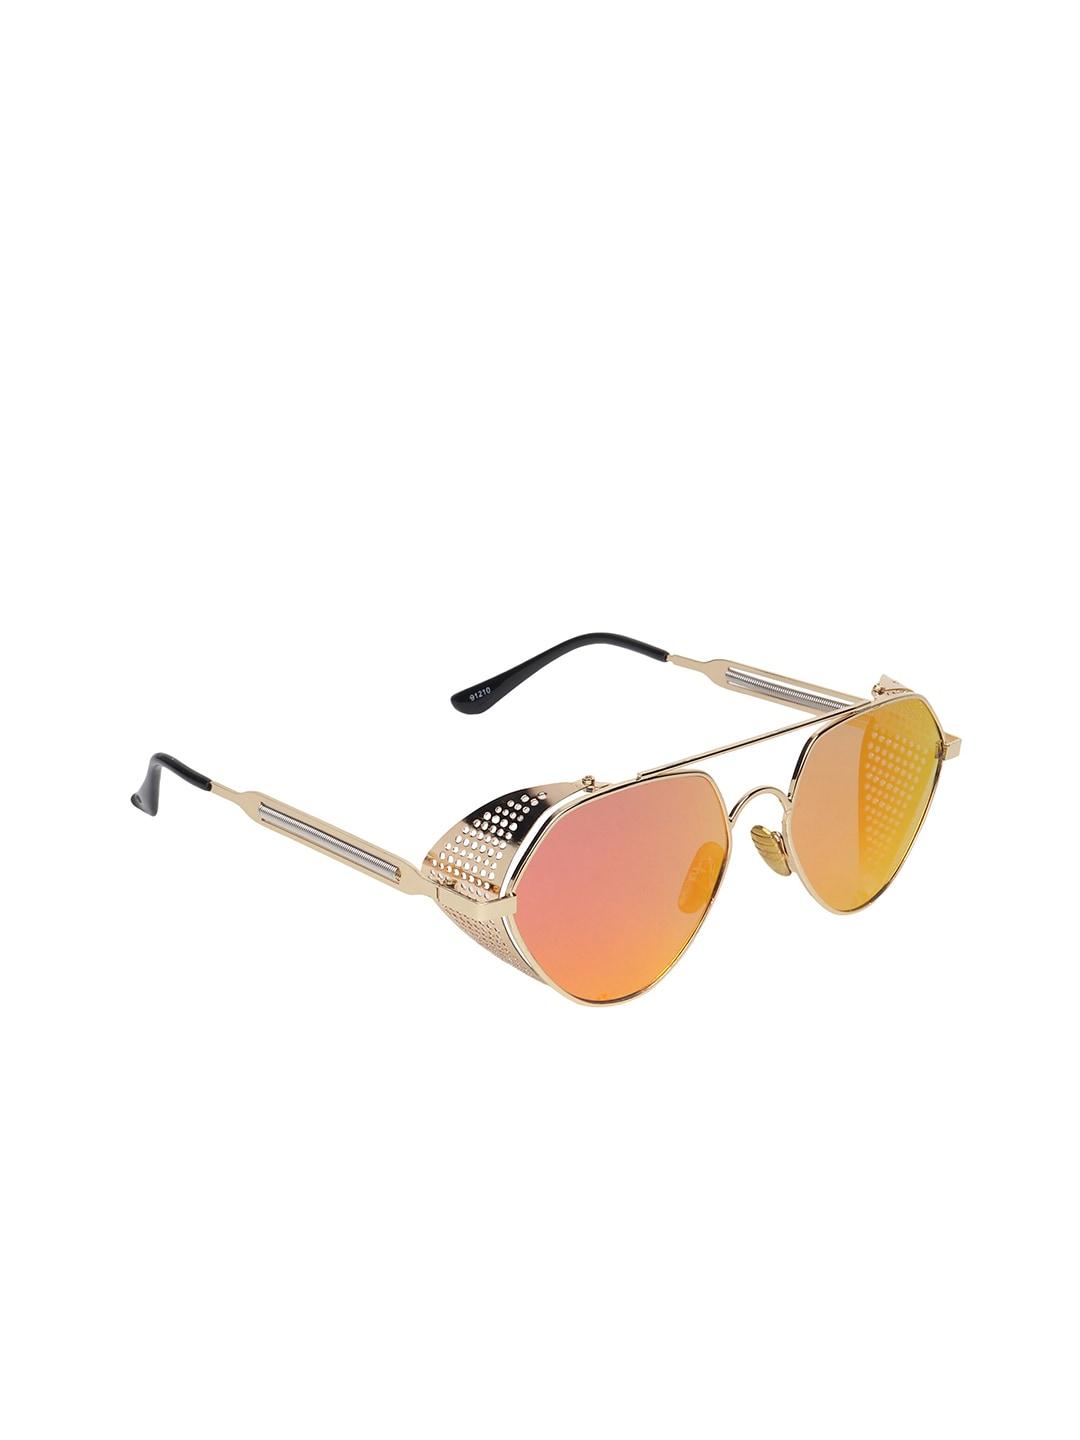 swiss design oval sunglasses with uv protected lens